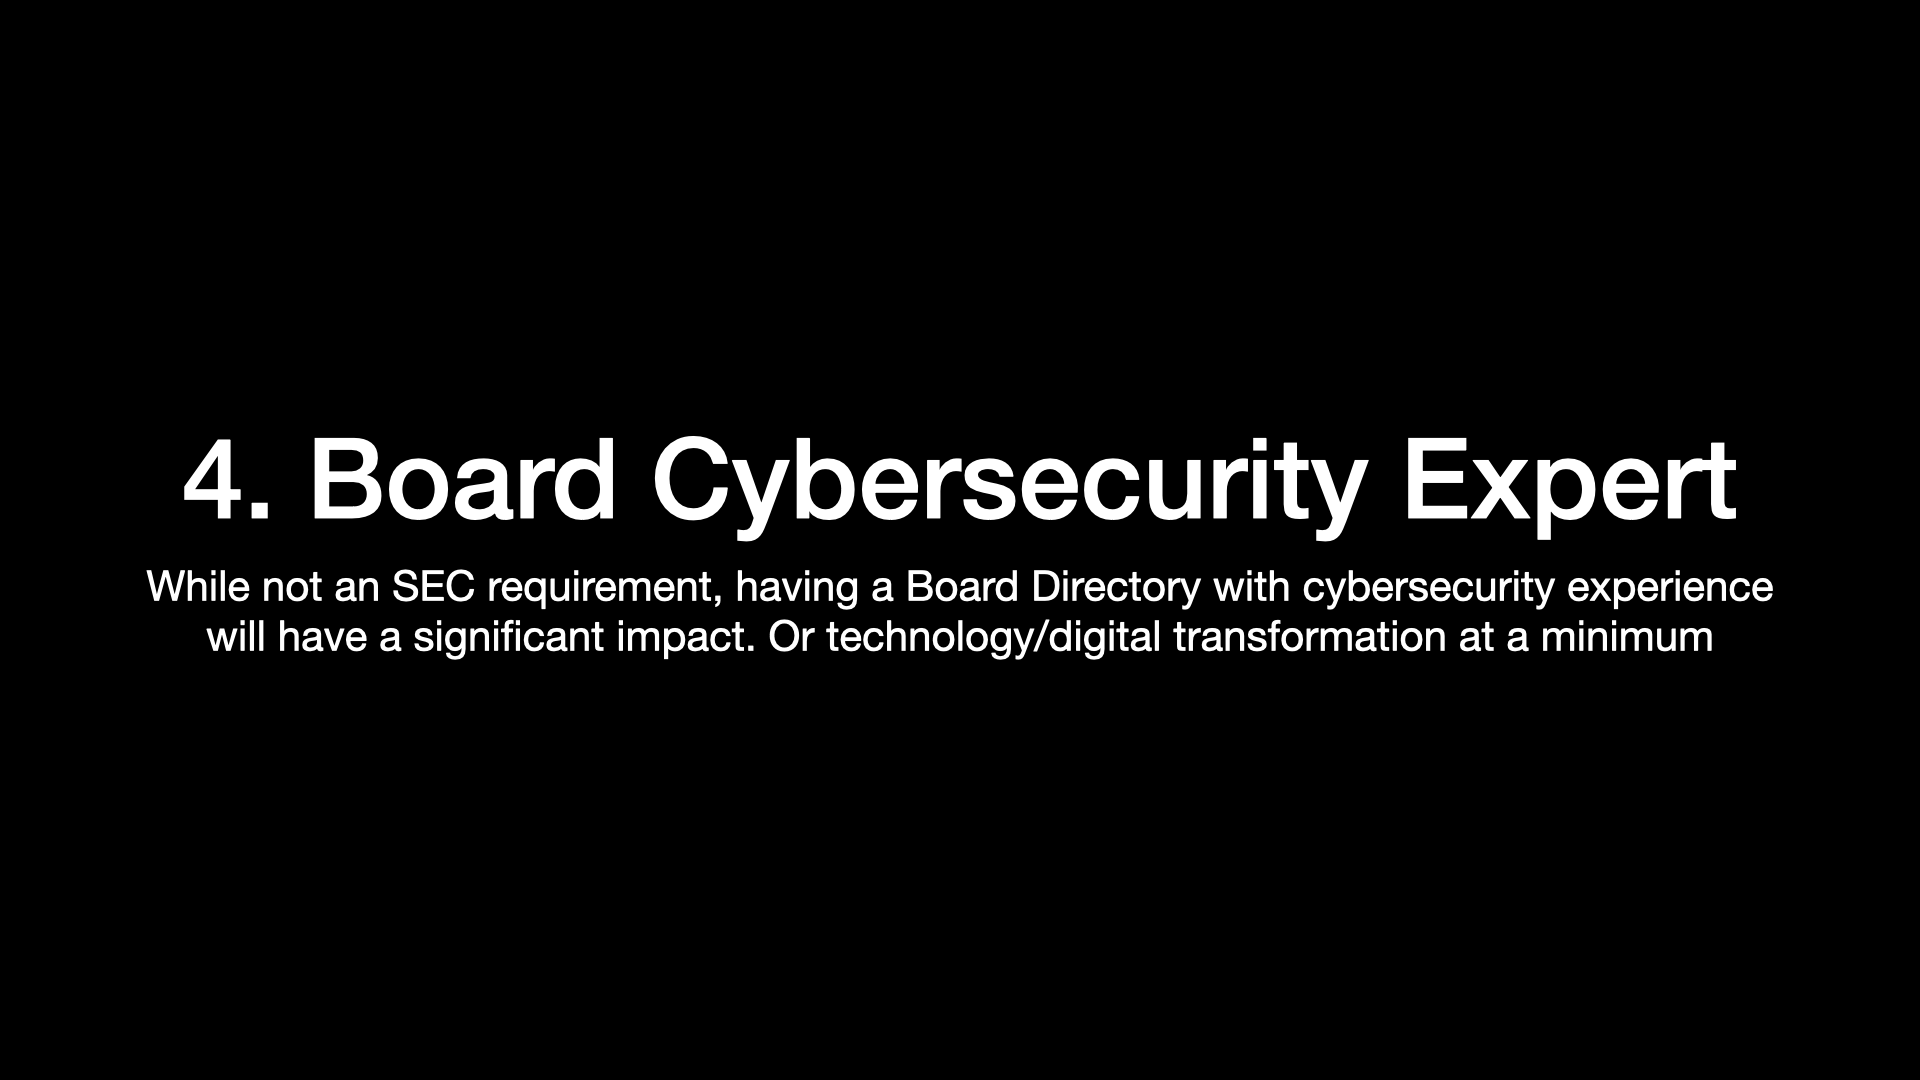 4. Board Cybersecurity Expert While not an SEC requirement, having a Board Directory with cybersecurity experience will have a significant impact. Or technology/digital transformation at a minimum 